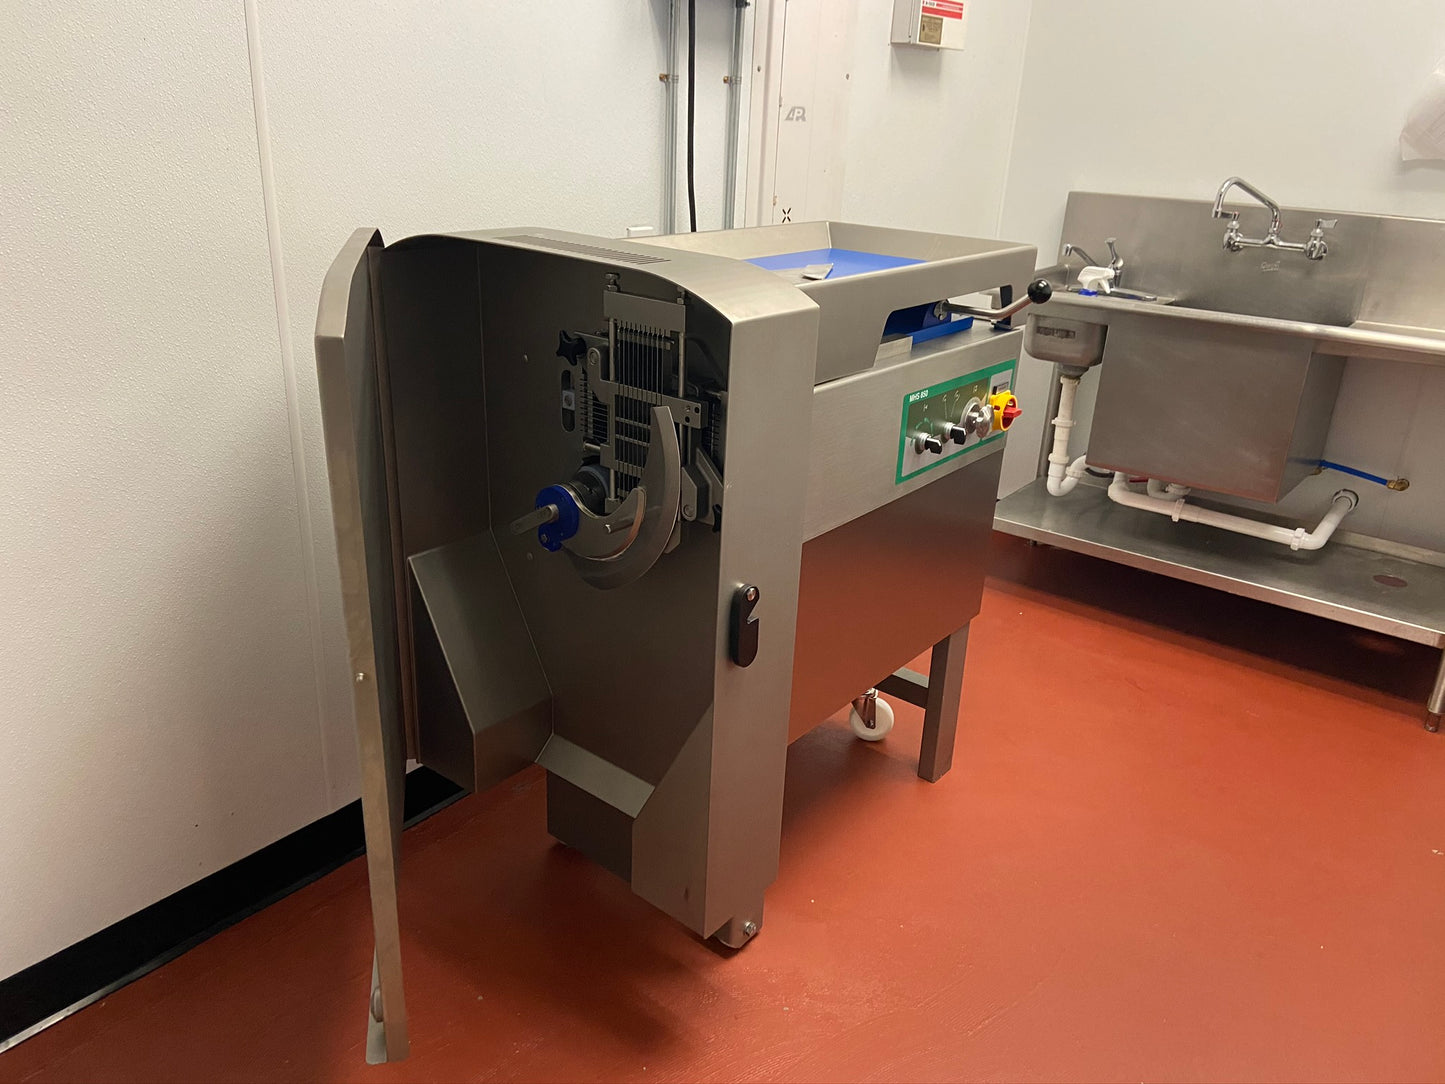 MHS Model 2000-105 Series Industrial Meat Dicer with Take away conveyor and optional bin lifter